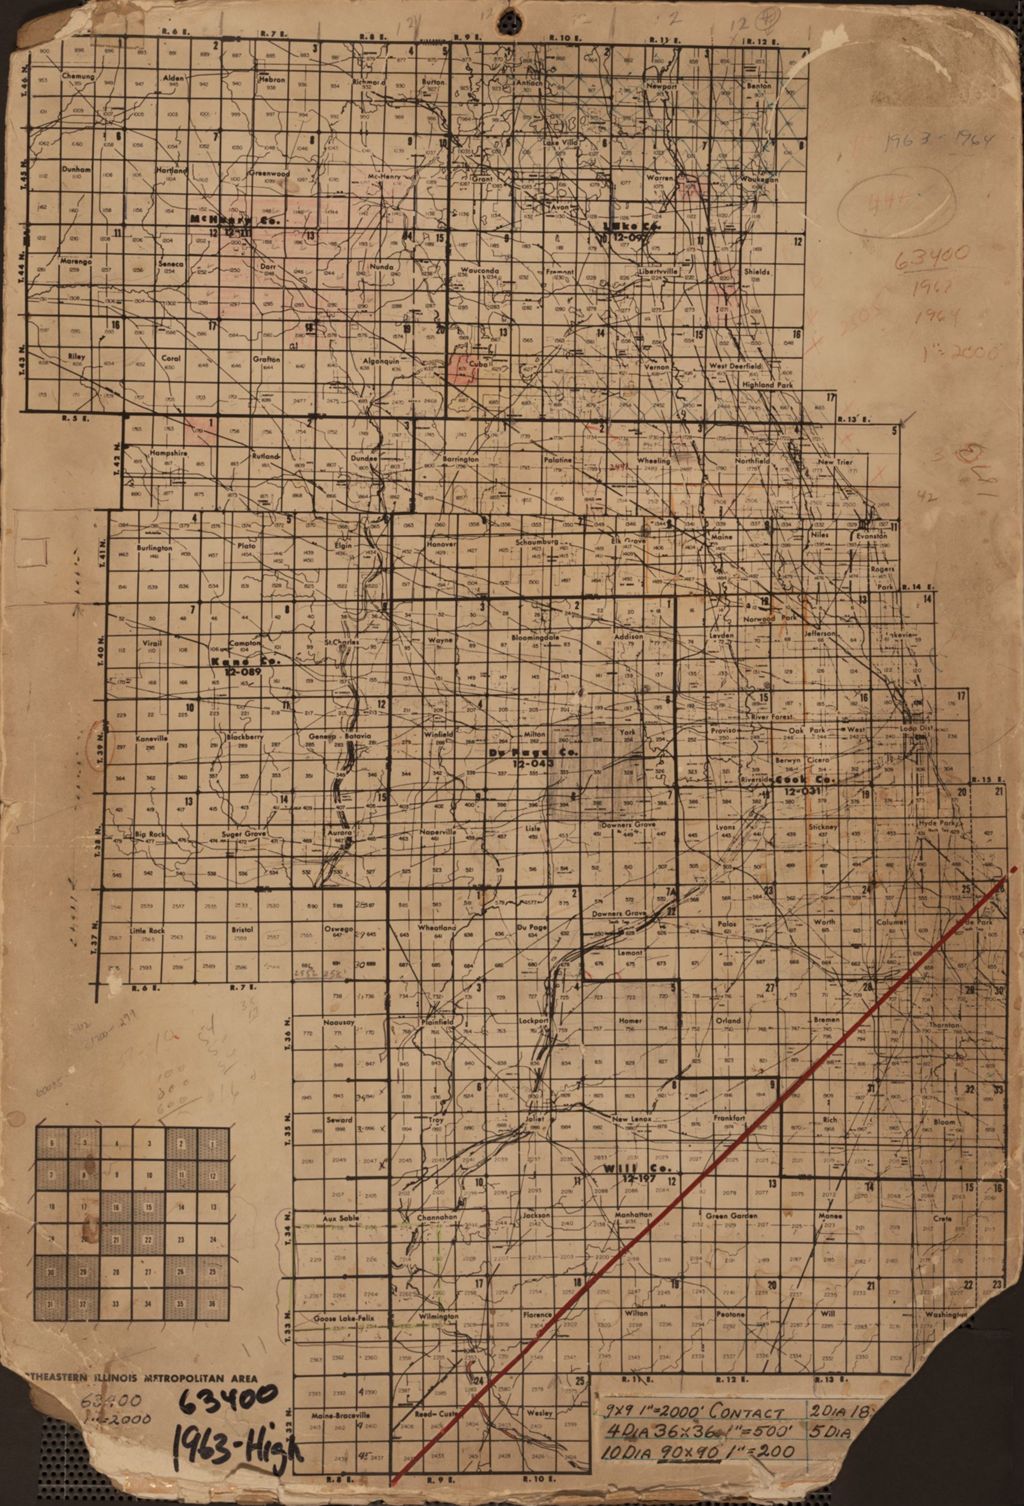 Miniature of Aerial survey index map for 1963-1964 Northeastern Illinois Aerial Survey (63400)